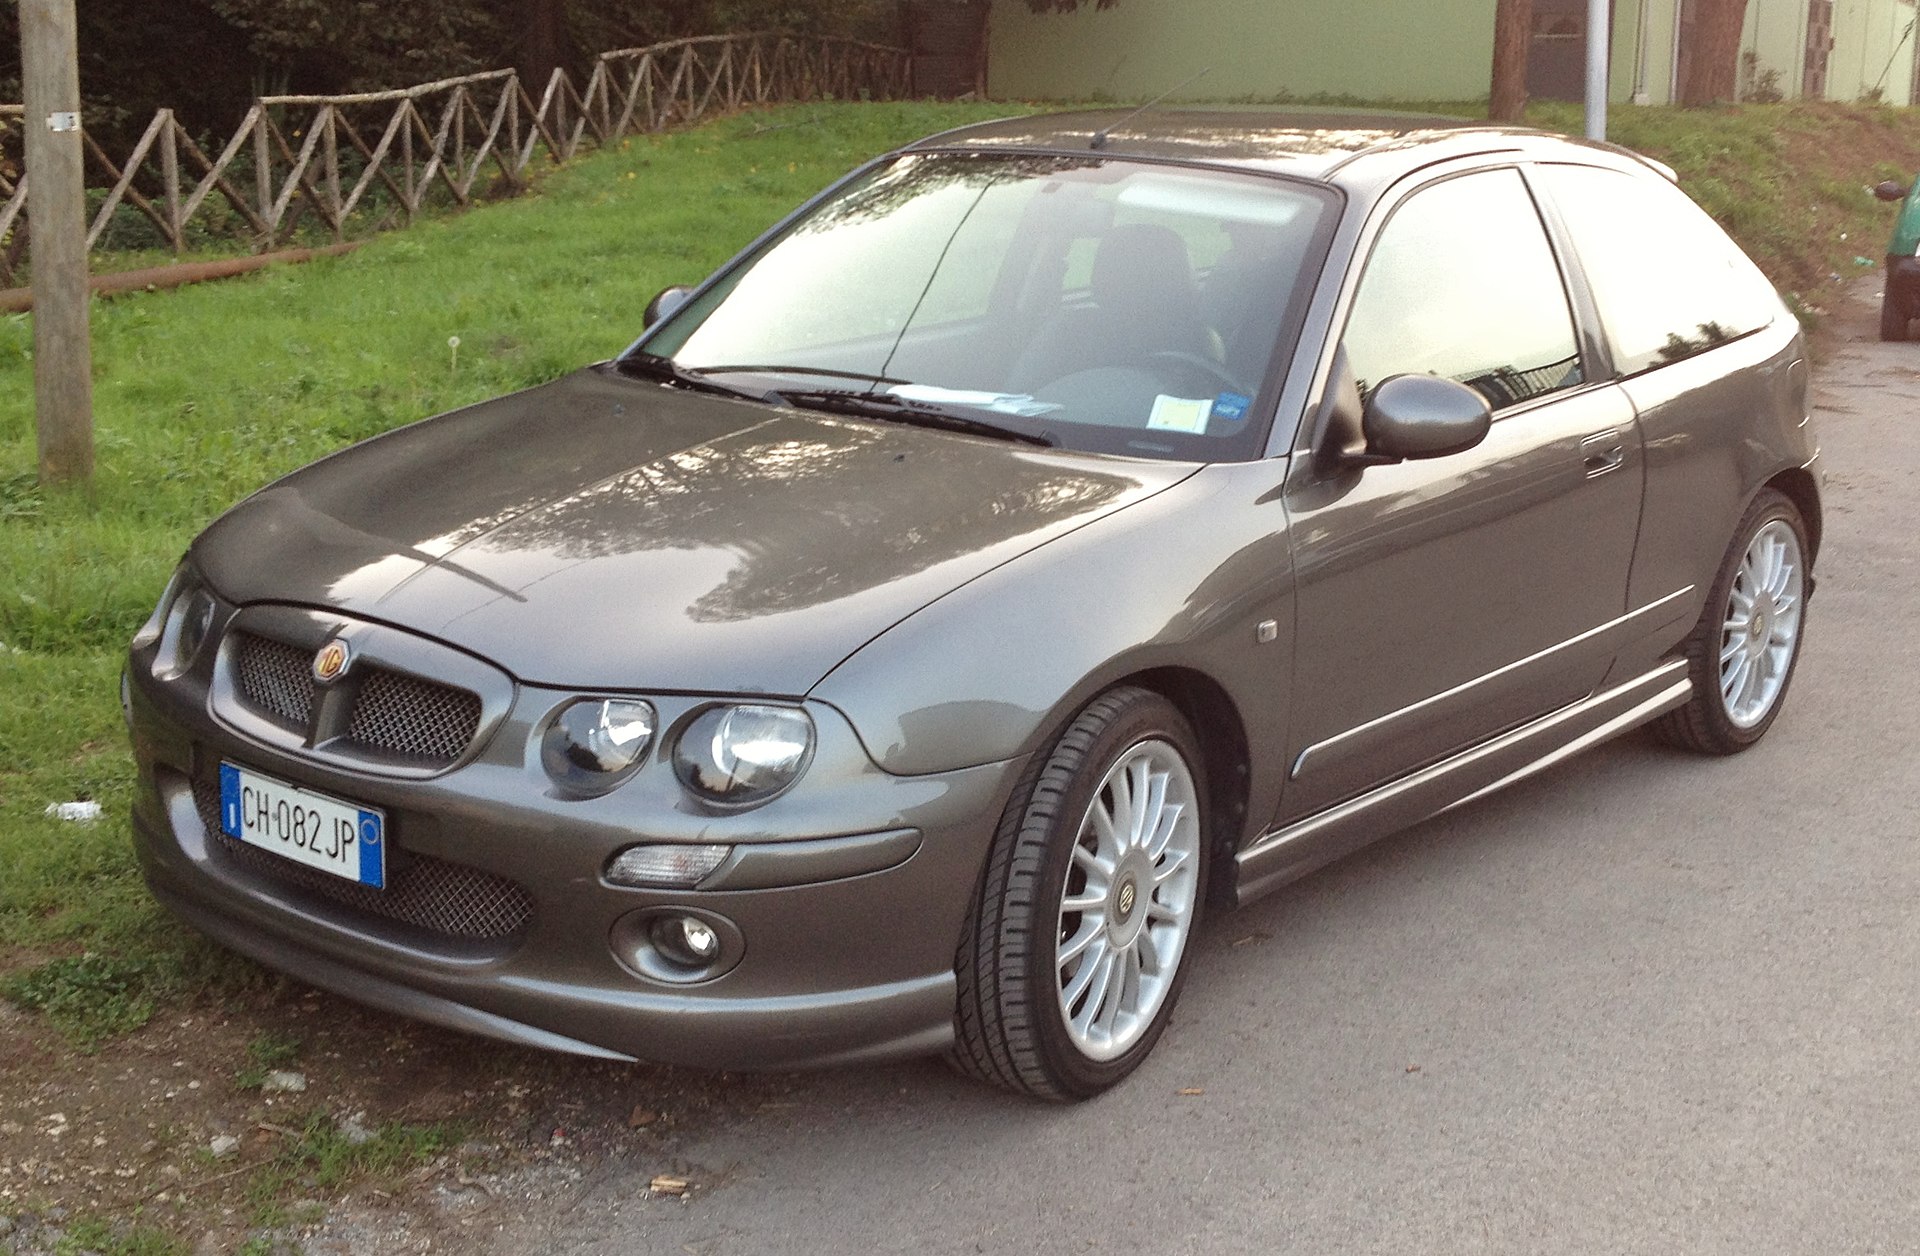 mg zr 1.4 review